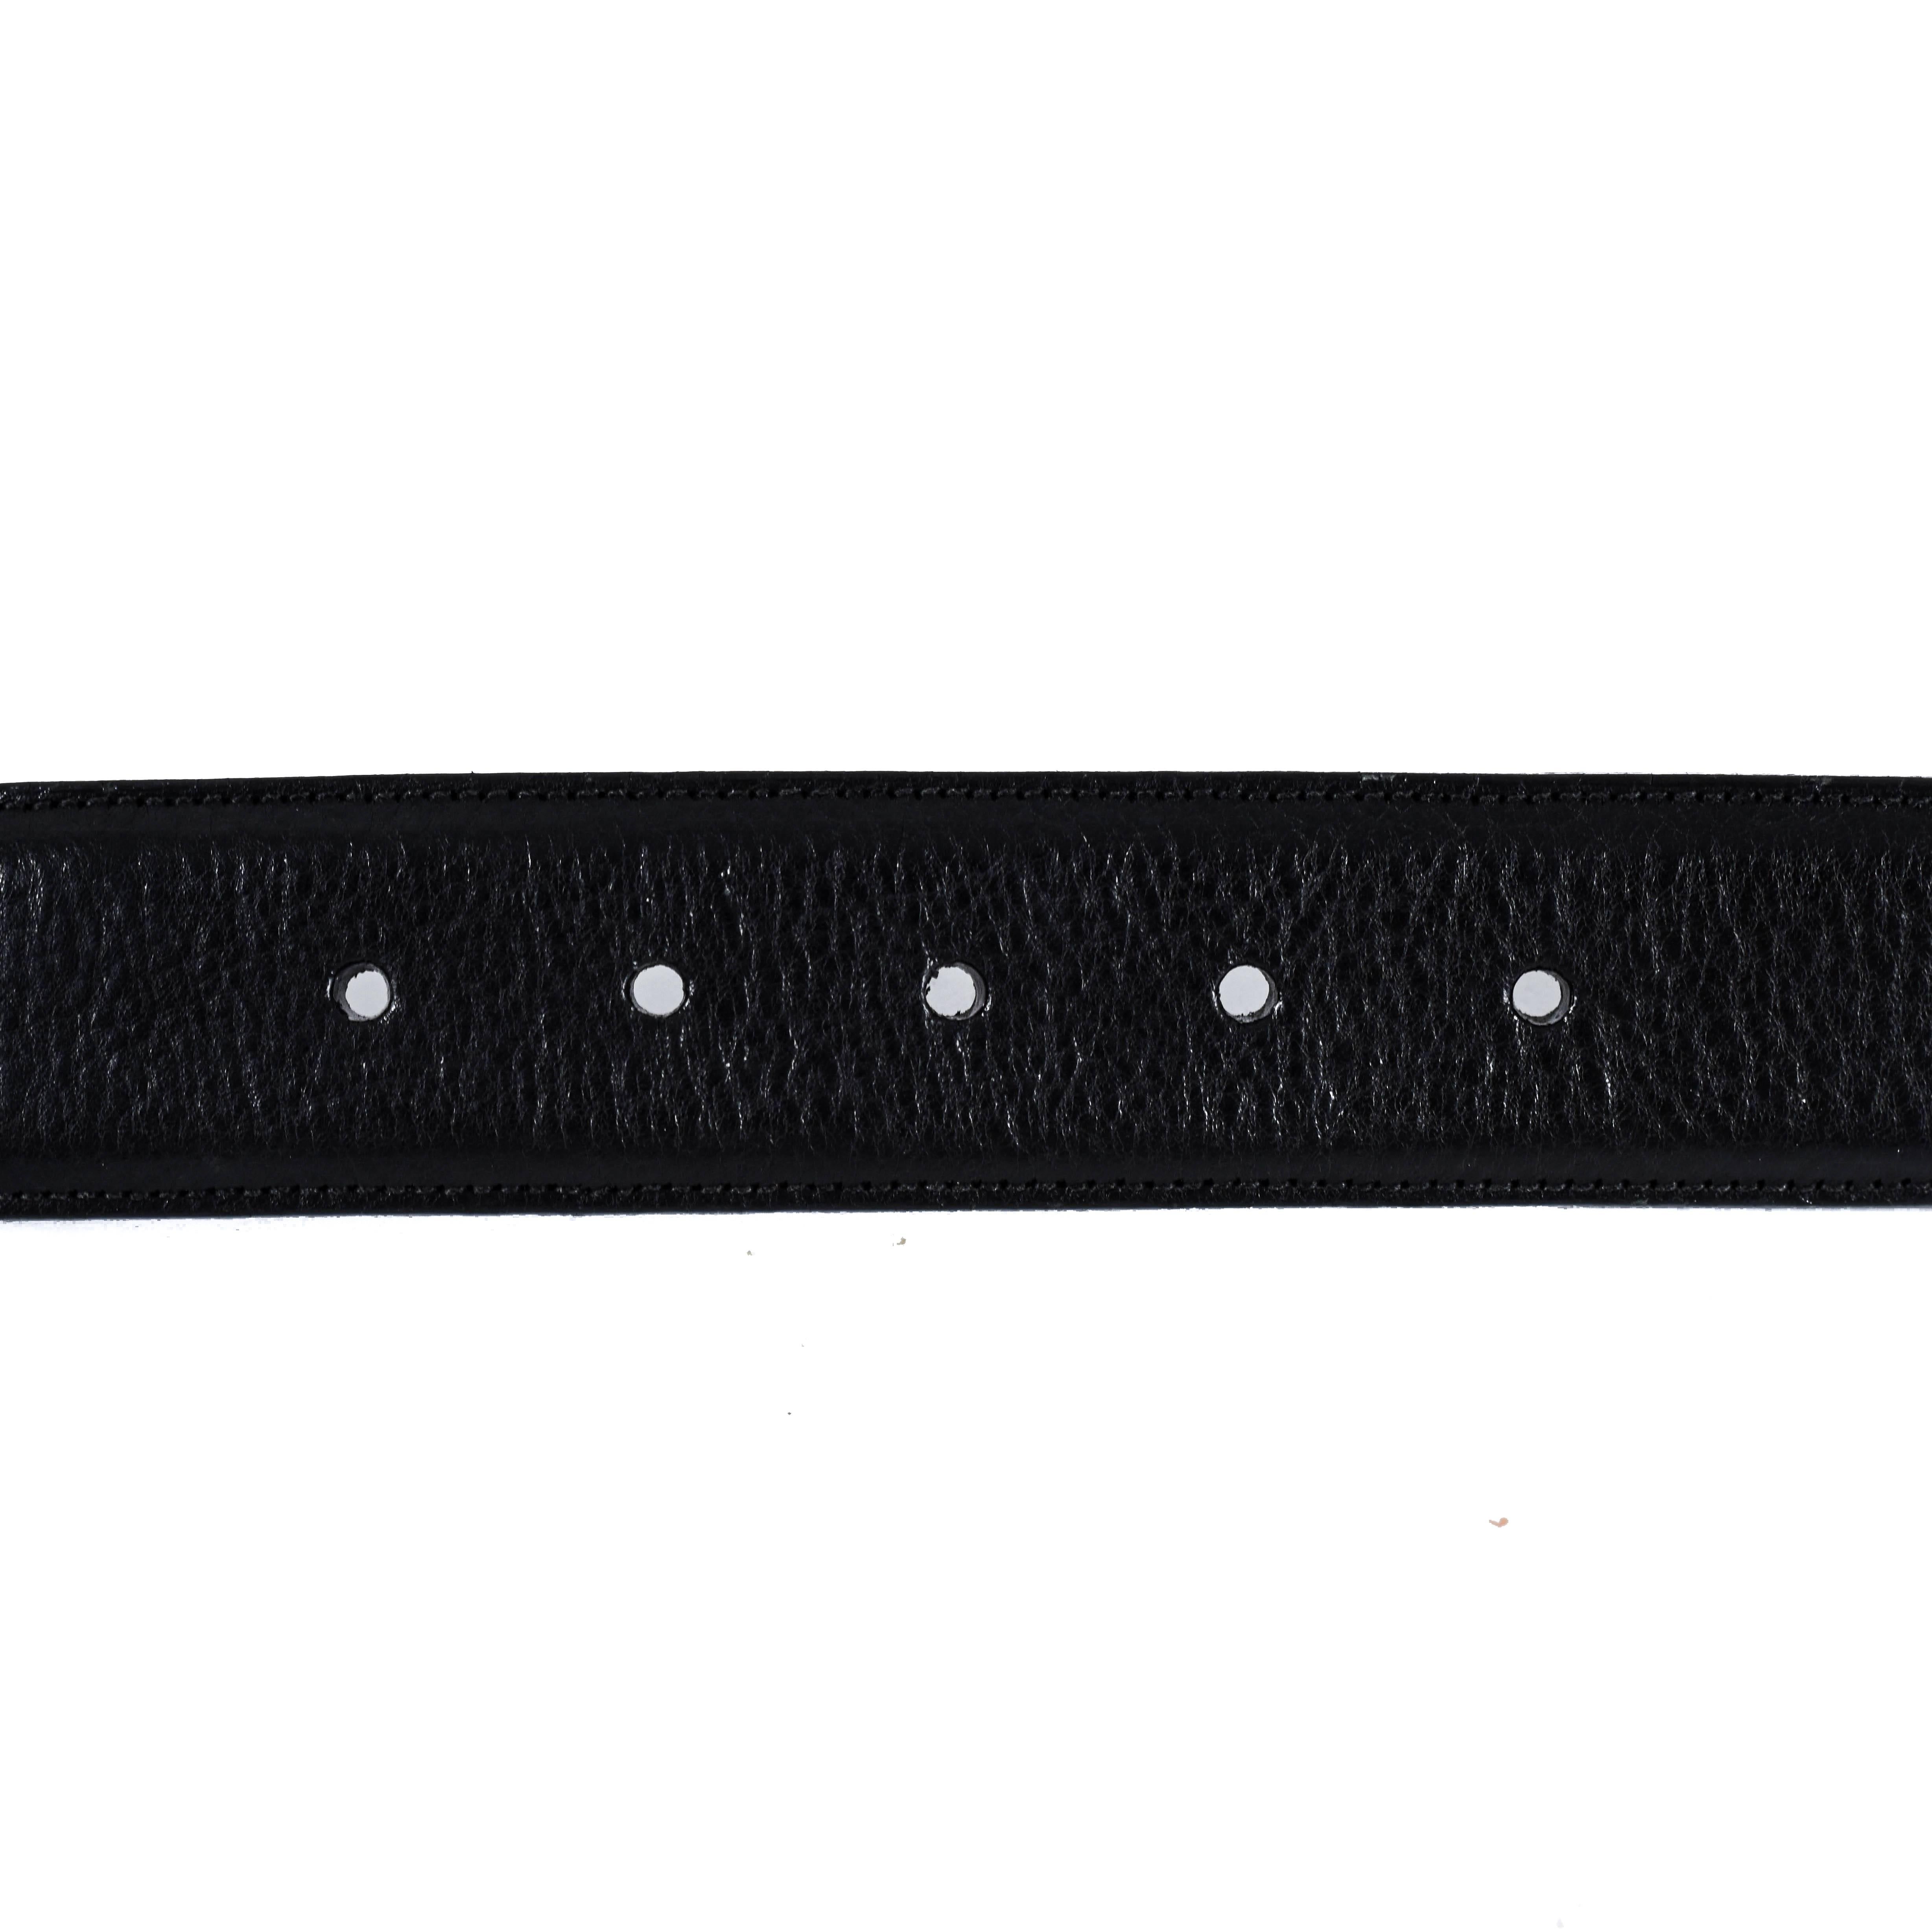 Chrome Hearts - Unisex Star Leather Belt
Size: US L
Color: Black
Material: Leather / Sterling Silver

-----------------------------------------------------------
Details:

- sterling silver hardware

- peg in hole closure

- star at